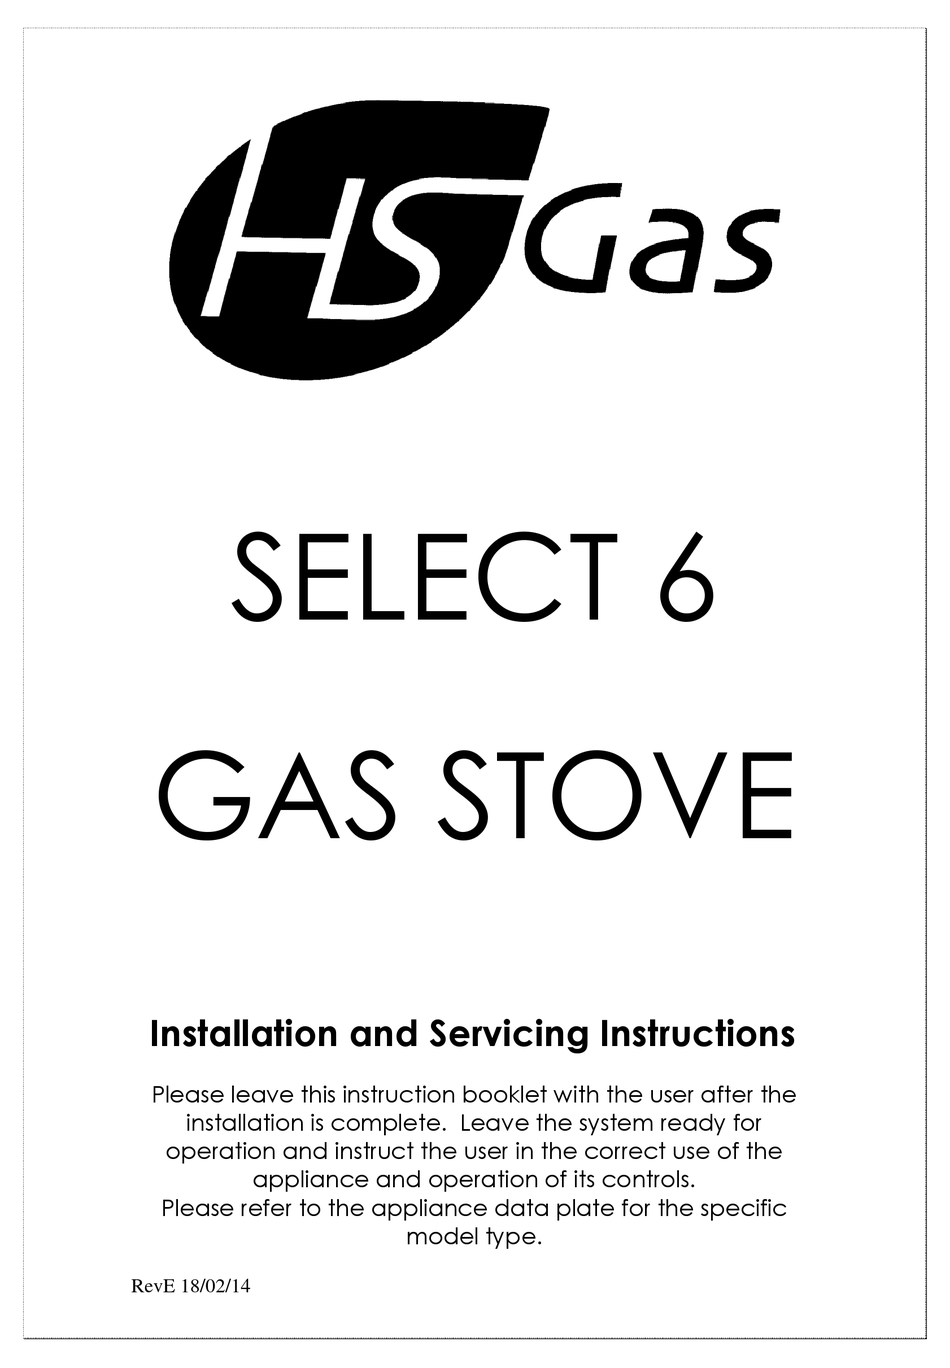 Hs Gas Select 6 Installation And Servicing Instructions Pdf Download Manualslib